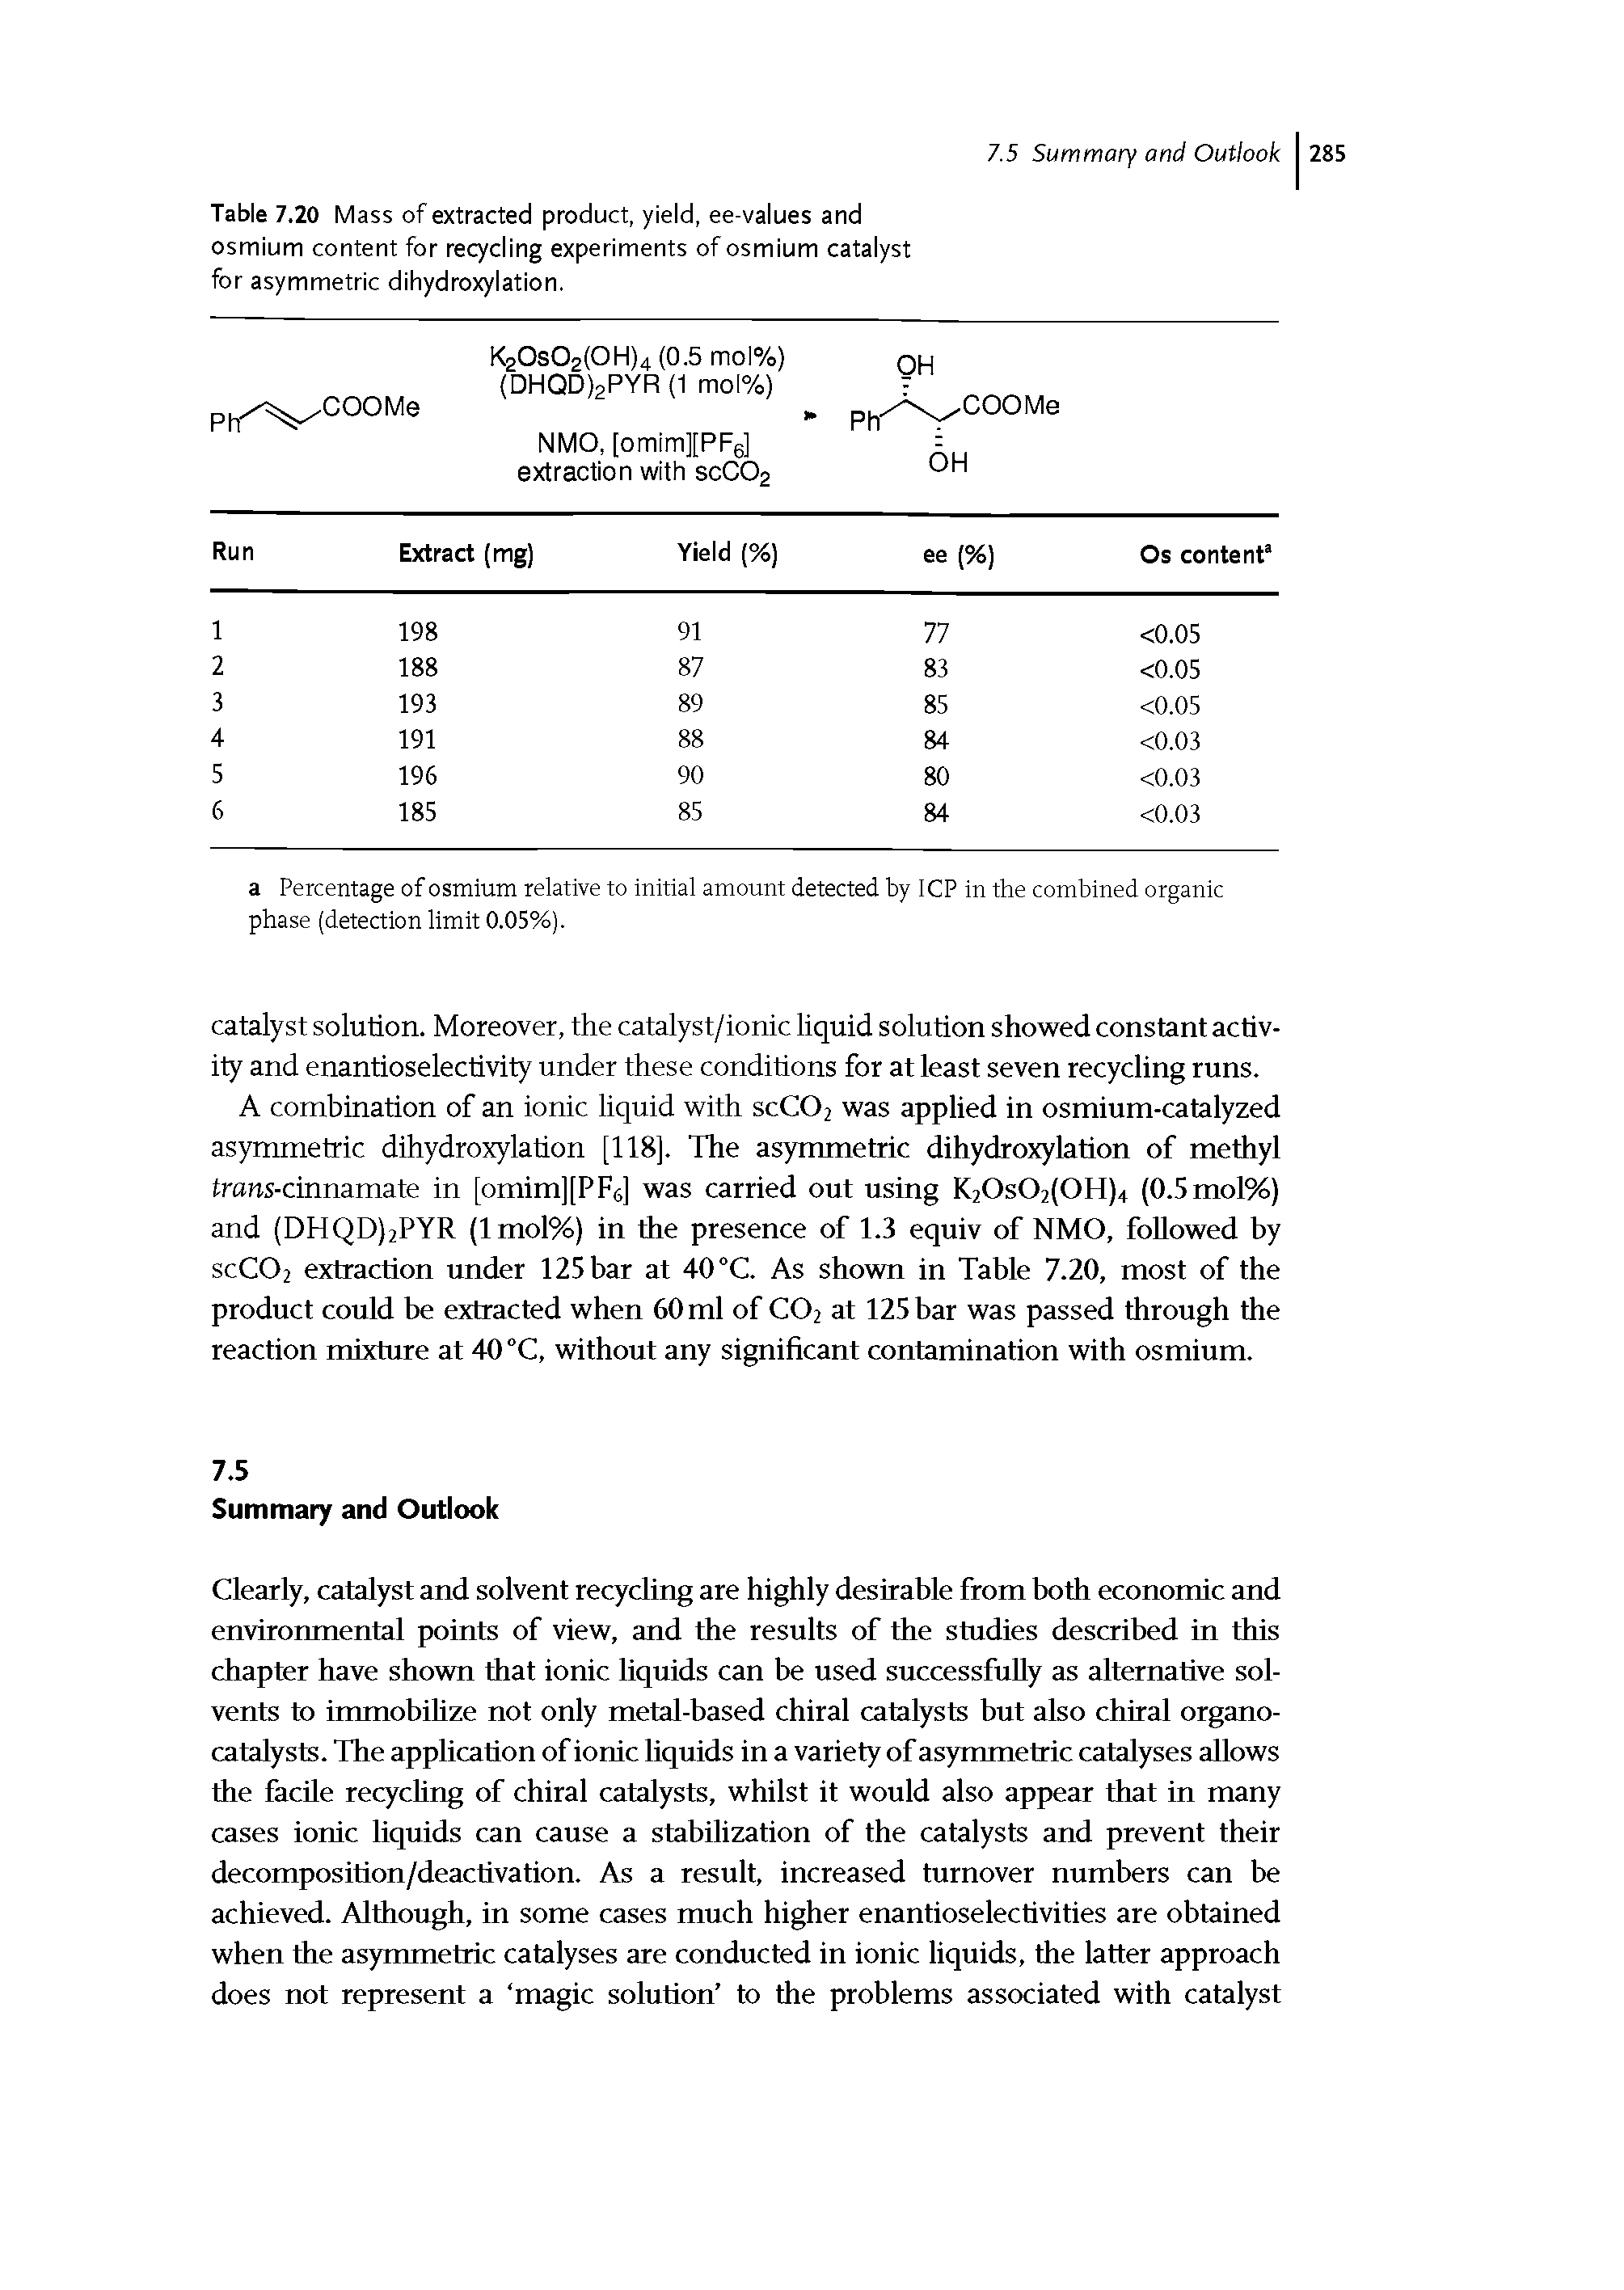 Table 7.20 Mass of extracted product, yield, ee-values and osmium content for recycling experiments of osmium catalyst for asymmetric dihydroxylation.